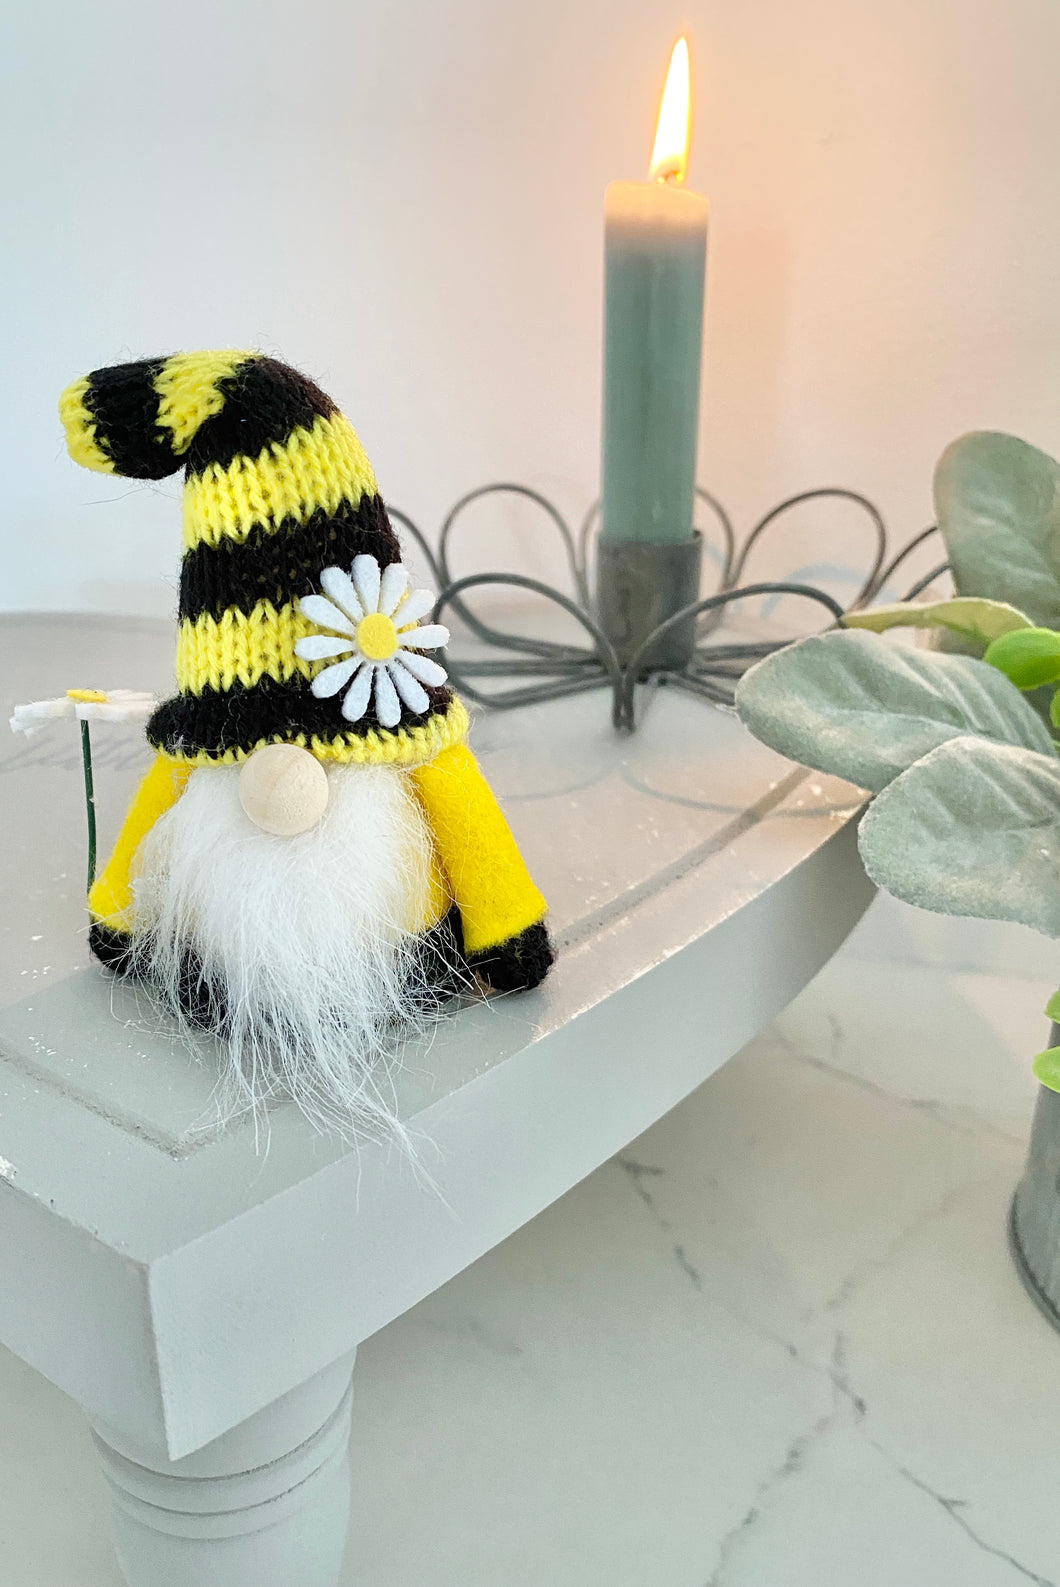 Bumble Bee Gonk/Gnome - Dangly legs